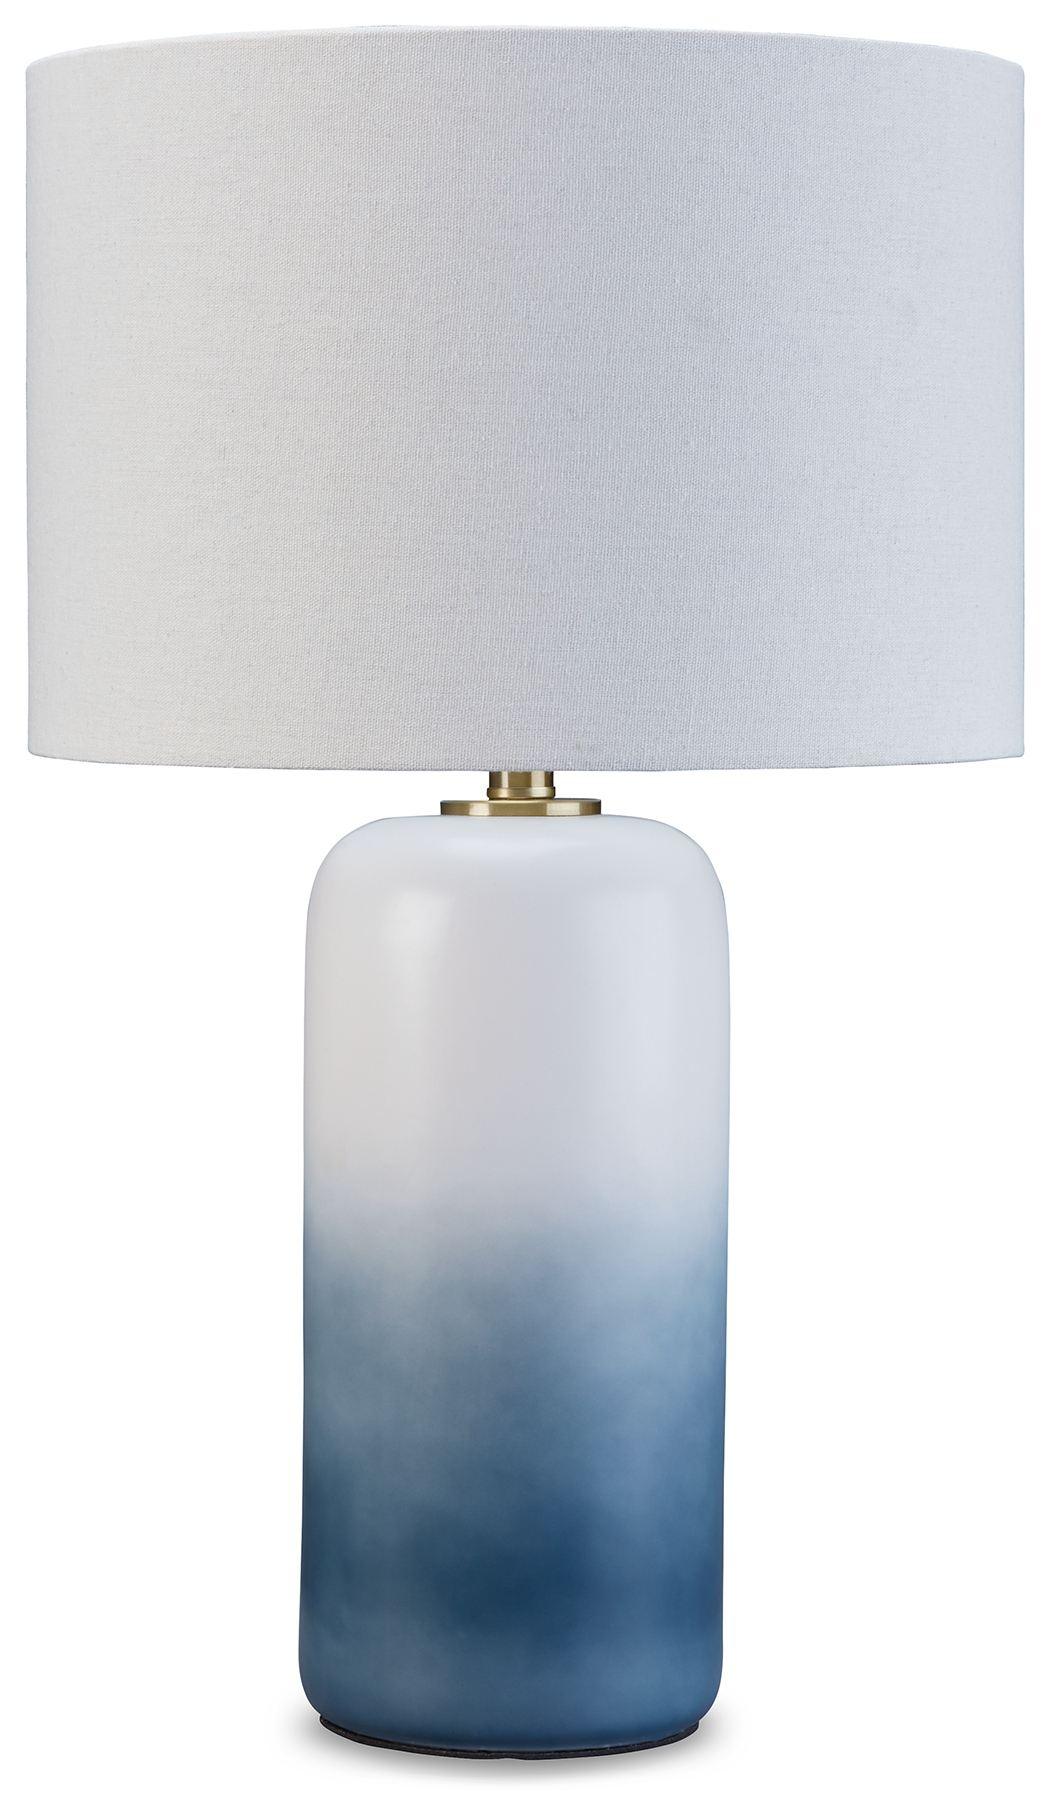 Lemrich - White - Ceramic Table Lamp Tony's Home Furnishings Furniture. Beds. Dressers. Sofas.